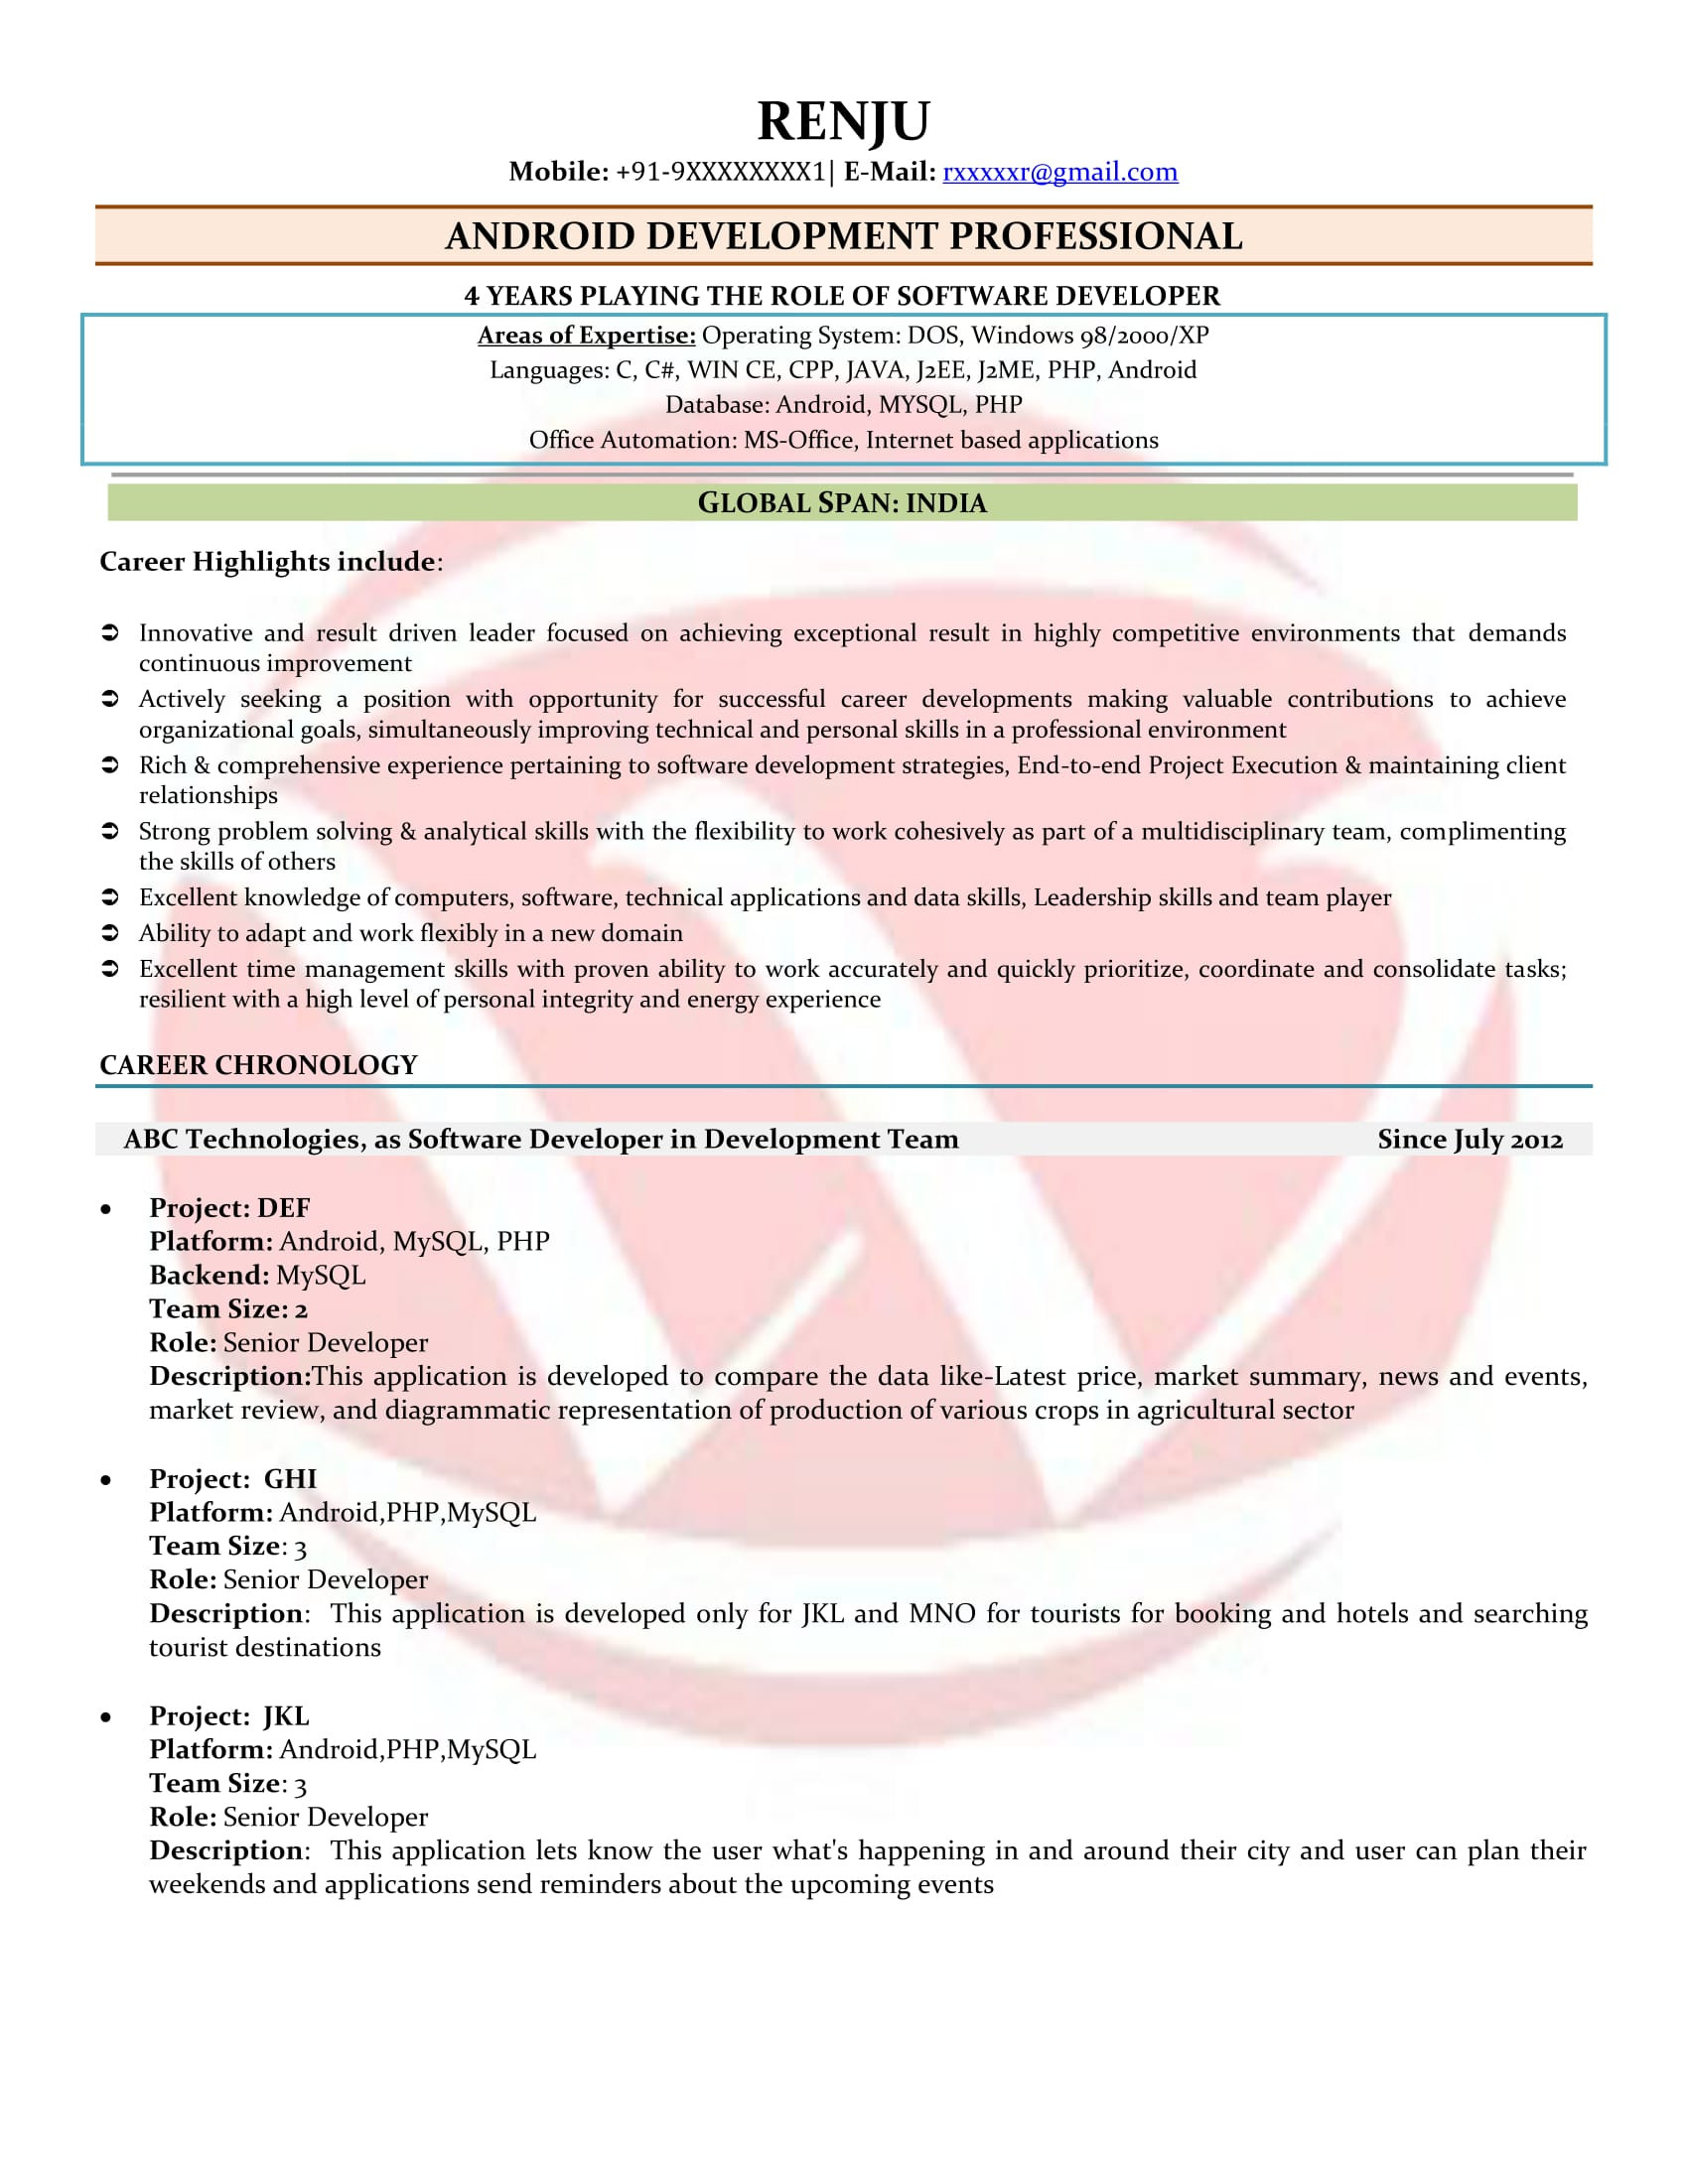 Net Developer with Health Care Domain Sample Resume android Developer Sample Resumes, Download Resume format Templates!